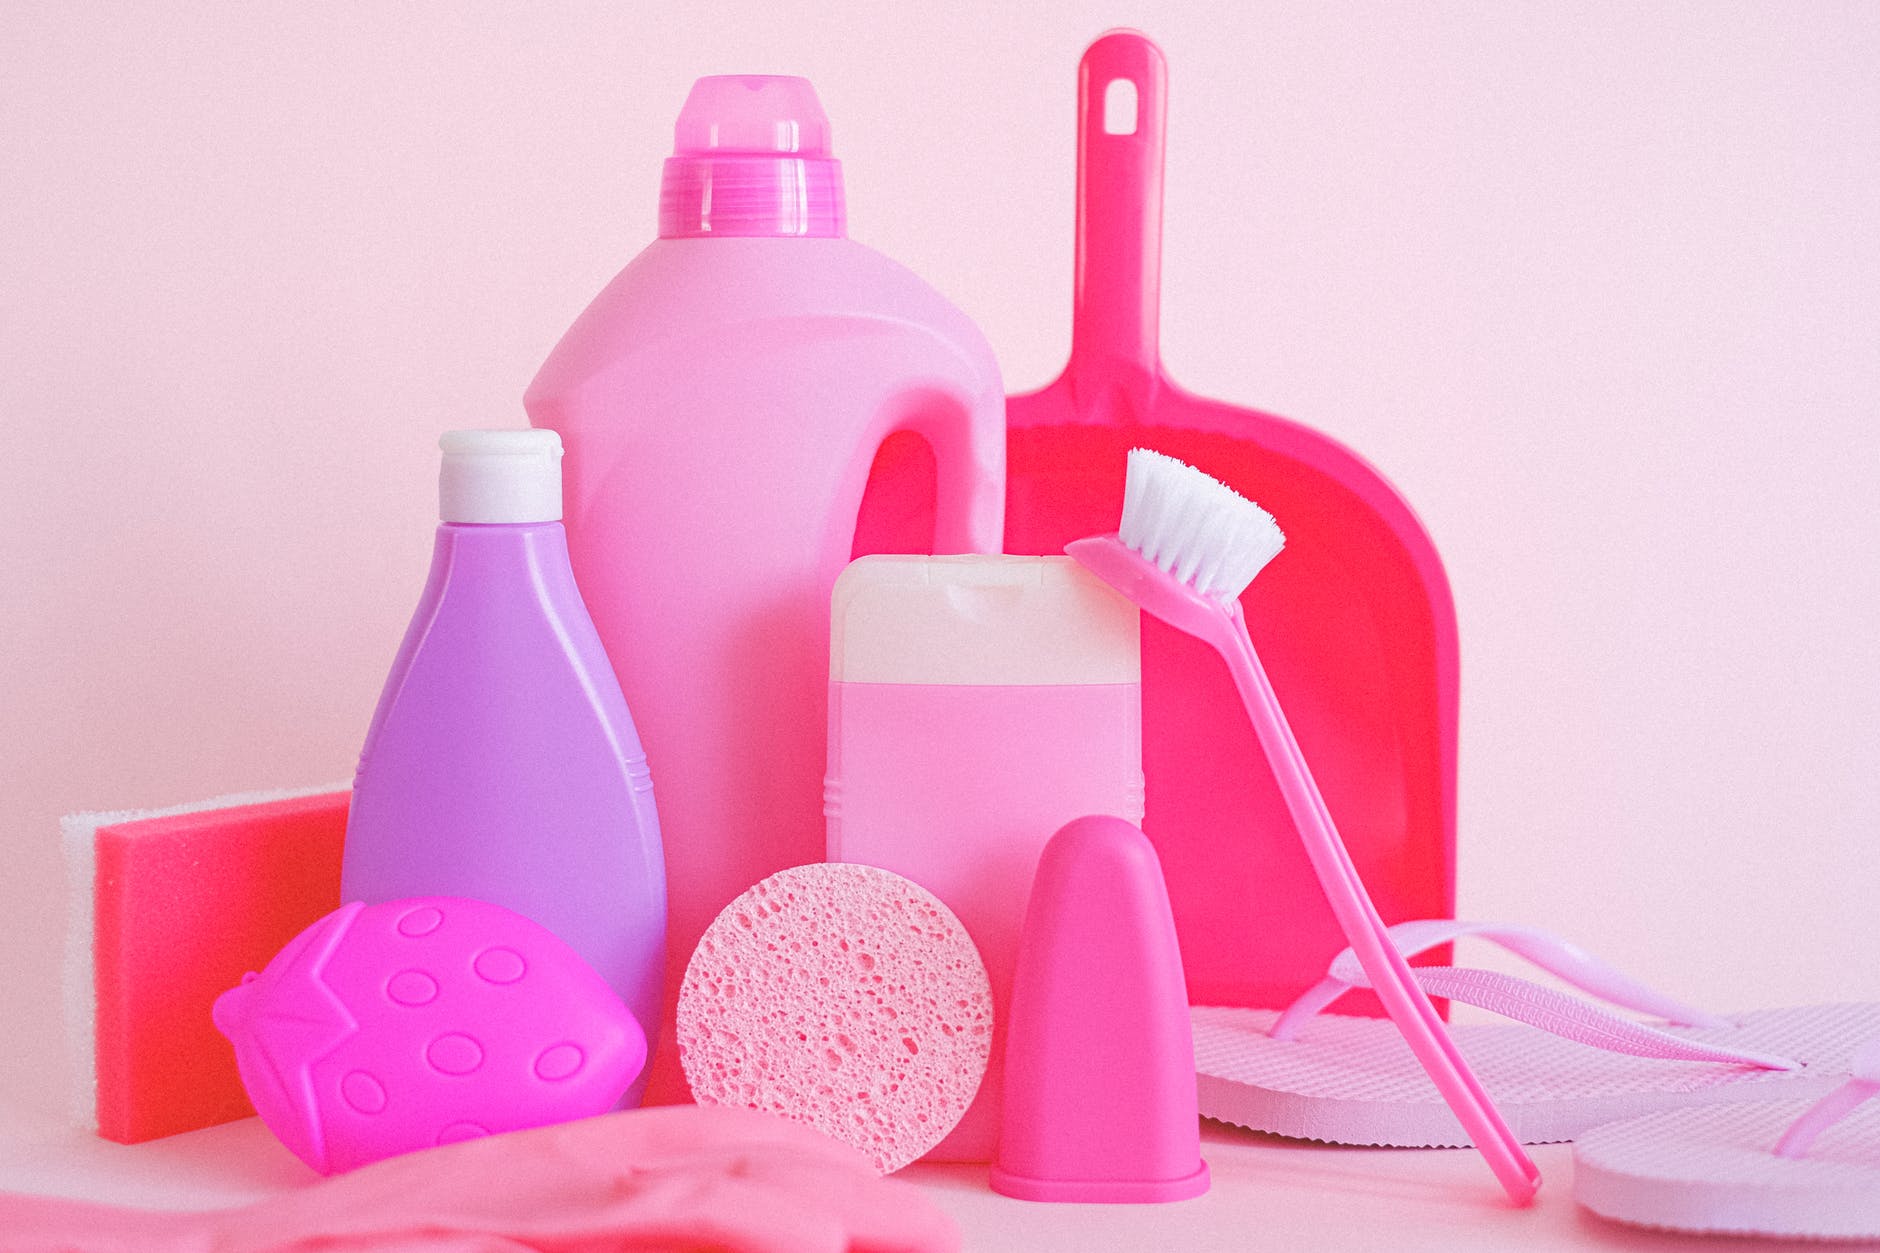 Pink home cleaning products on a white background.